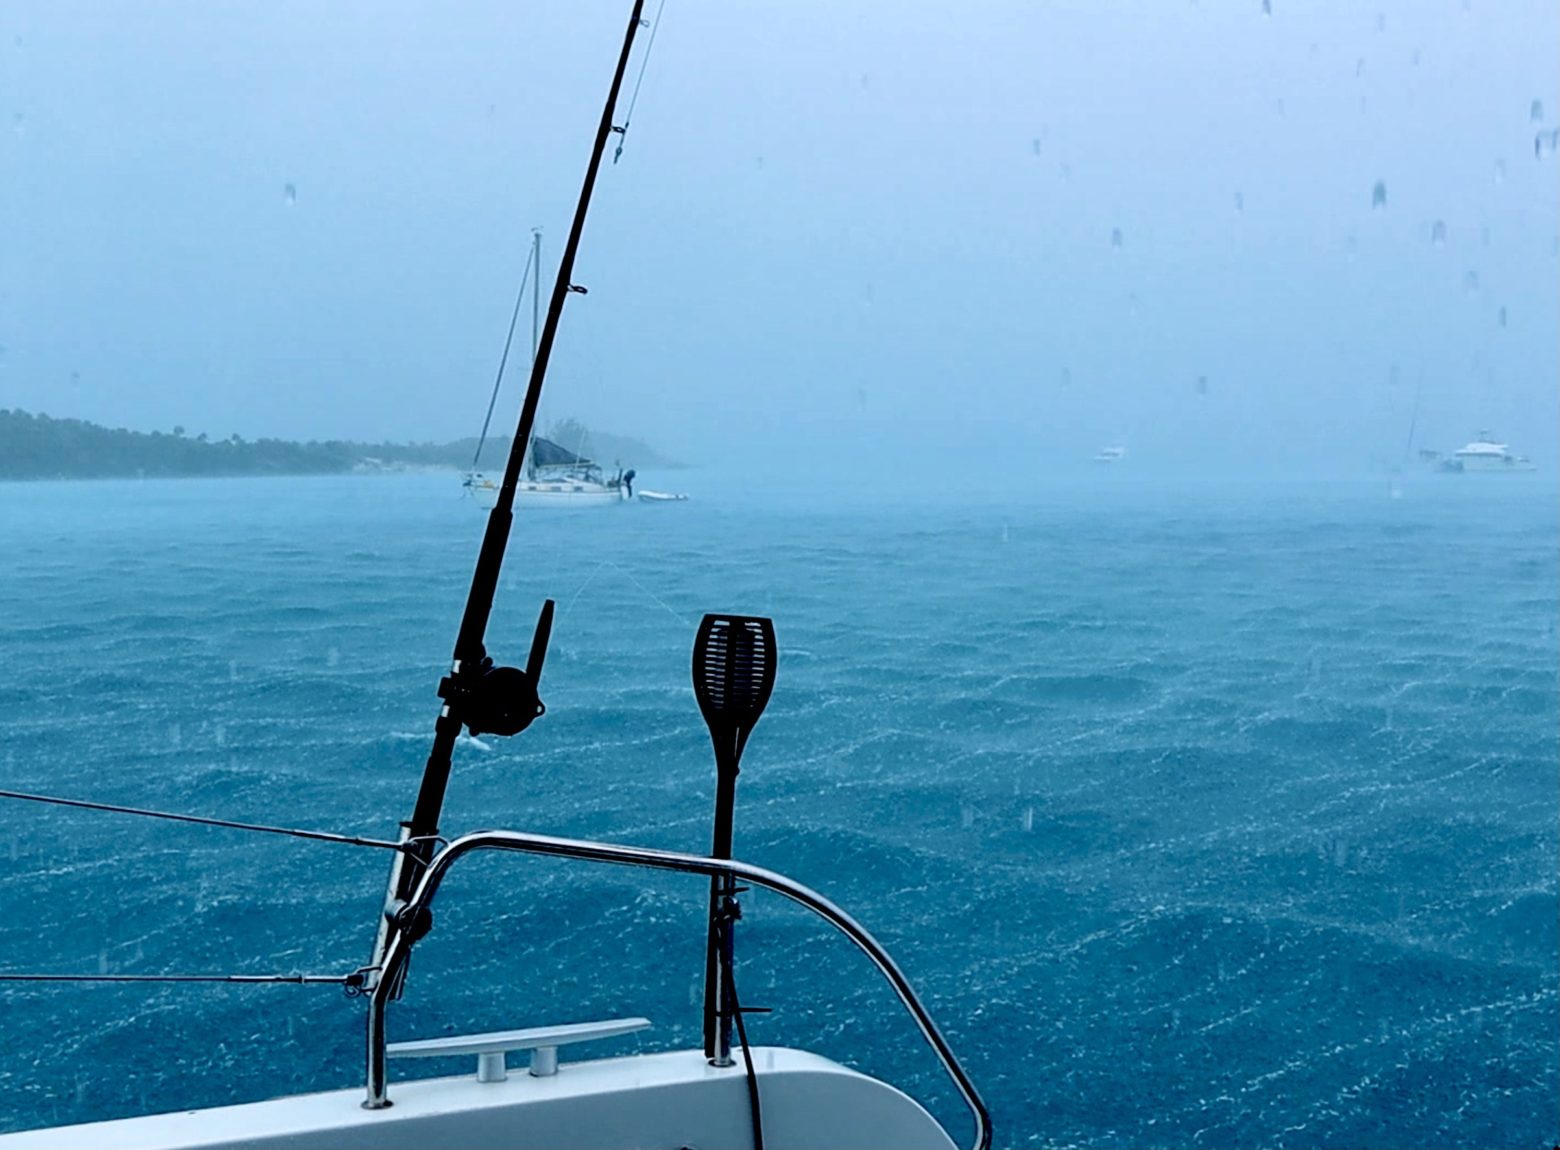 Our First Big Storm in the Bahamas!